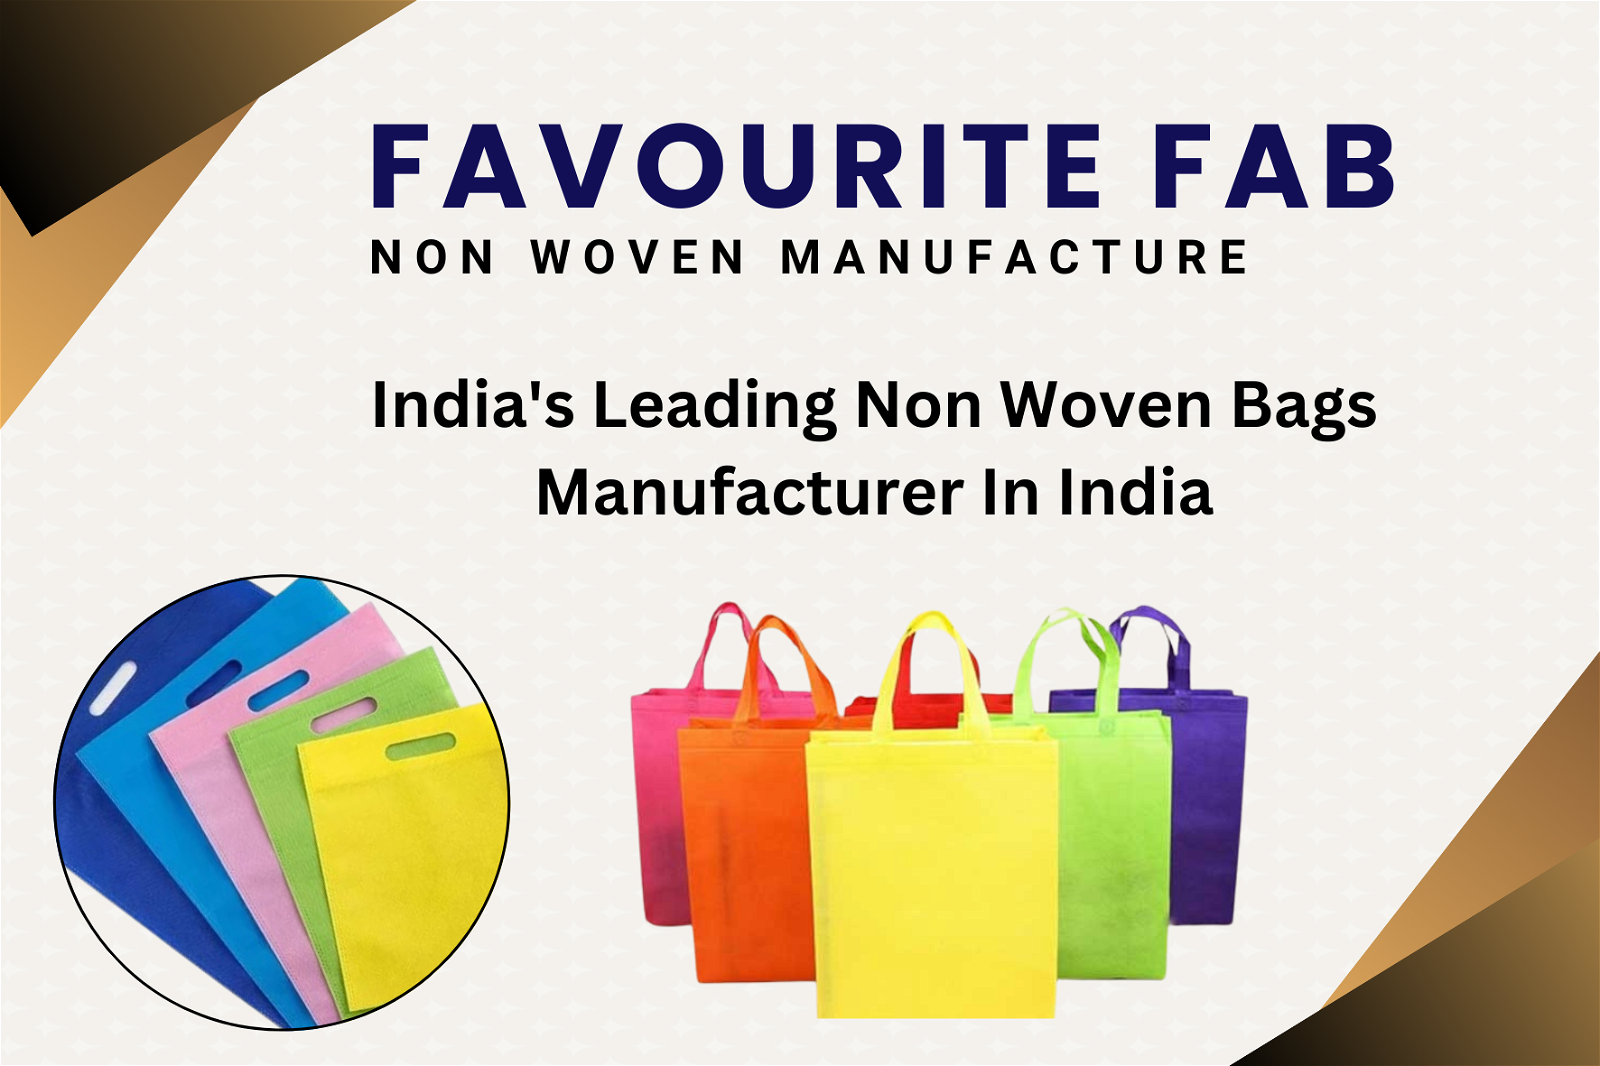 Non Woven Bag Making Business Ideas | How To Start Non Woven Bag Making  Business - YouTube